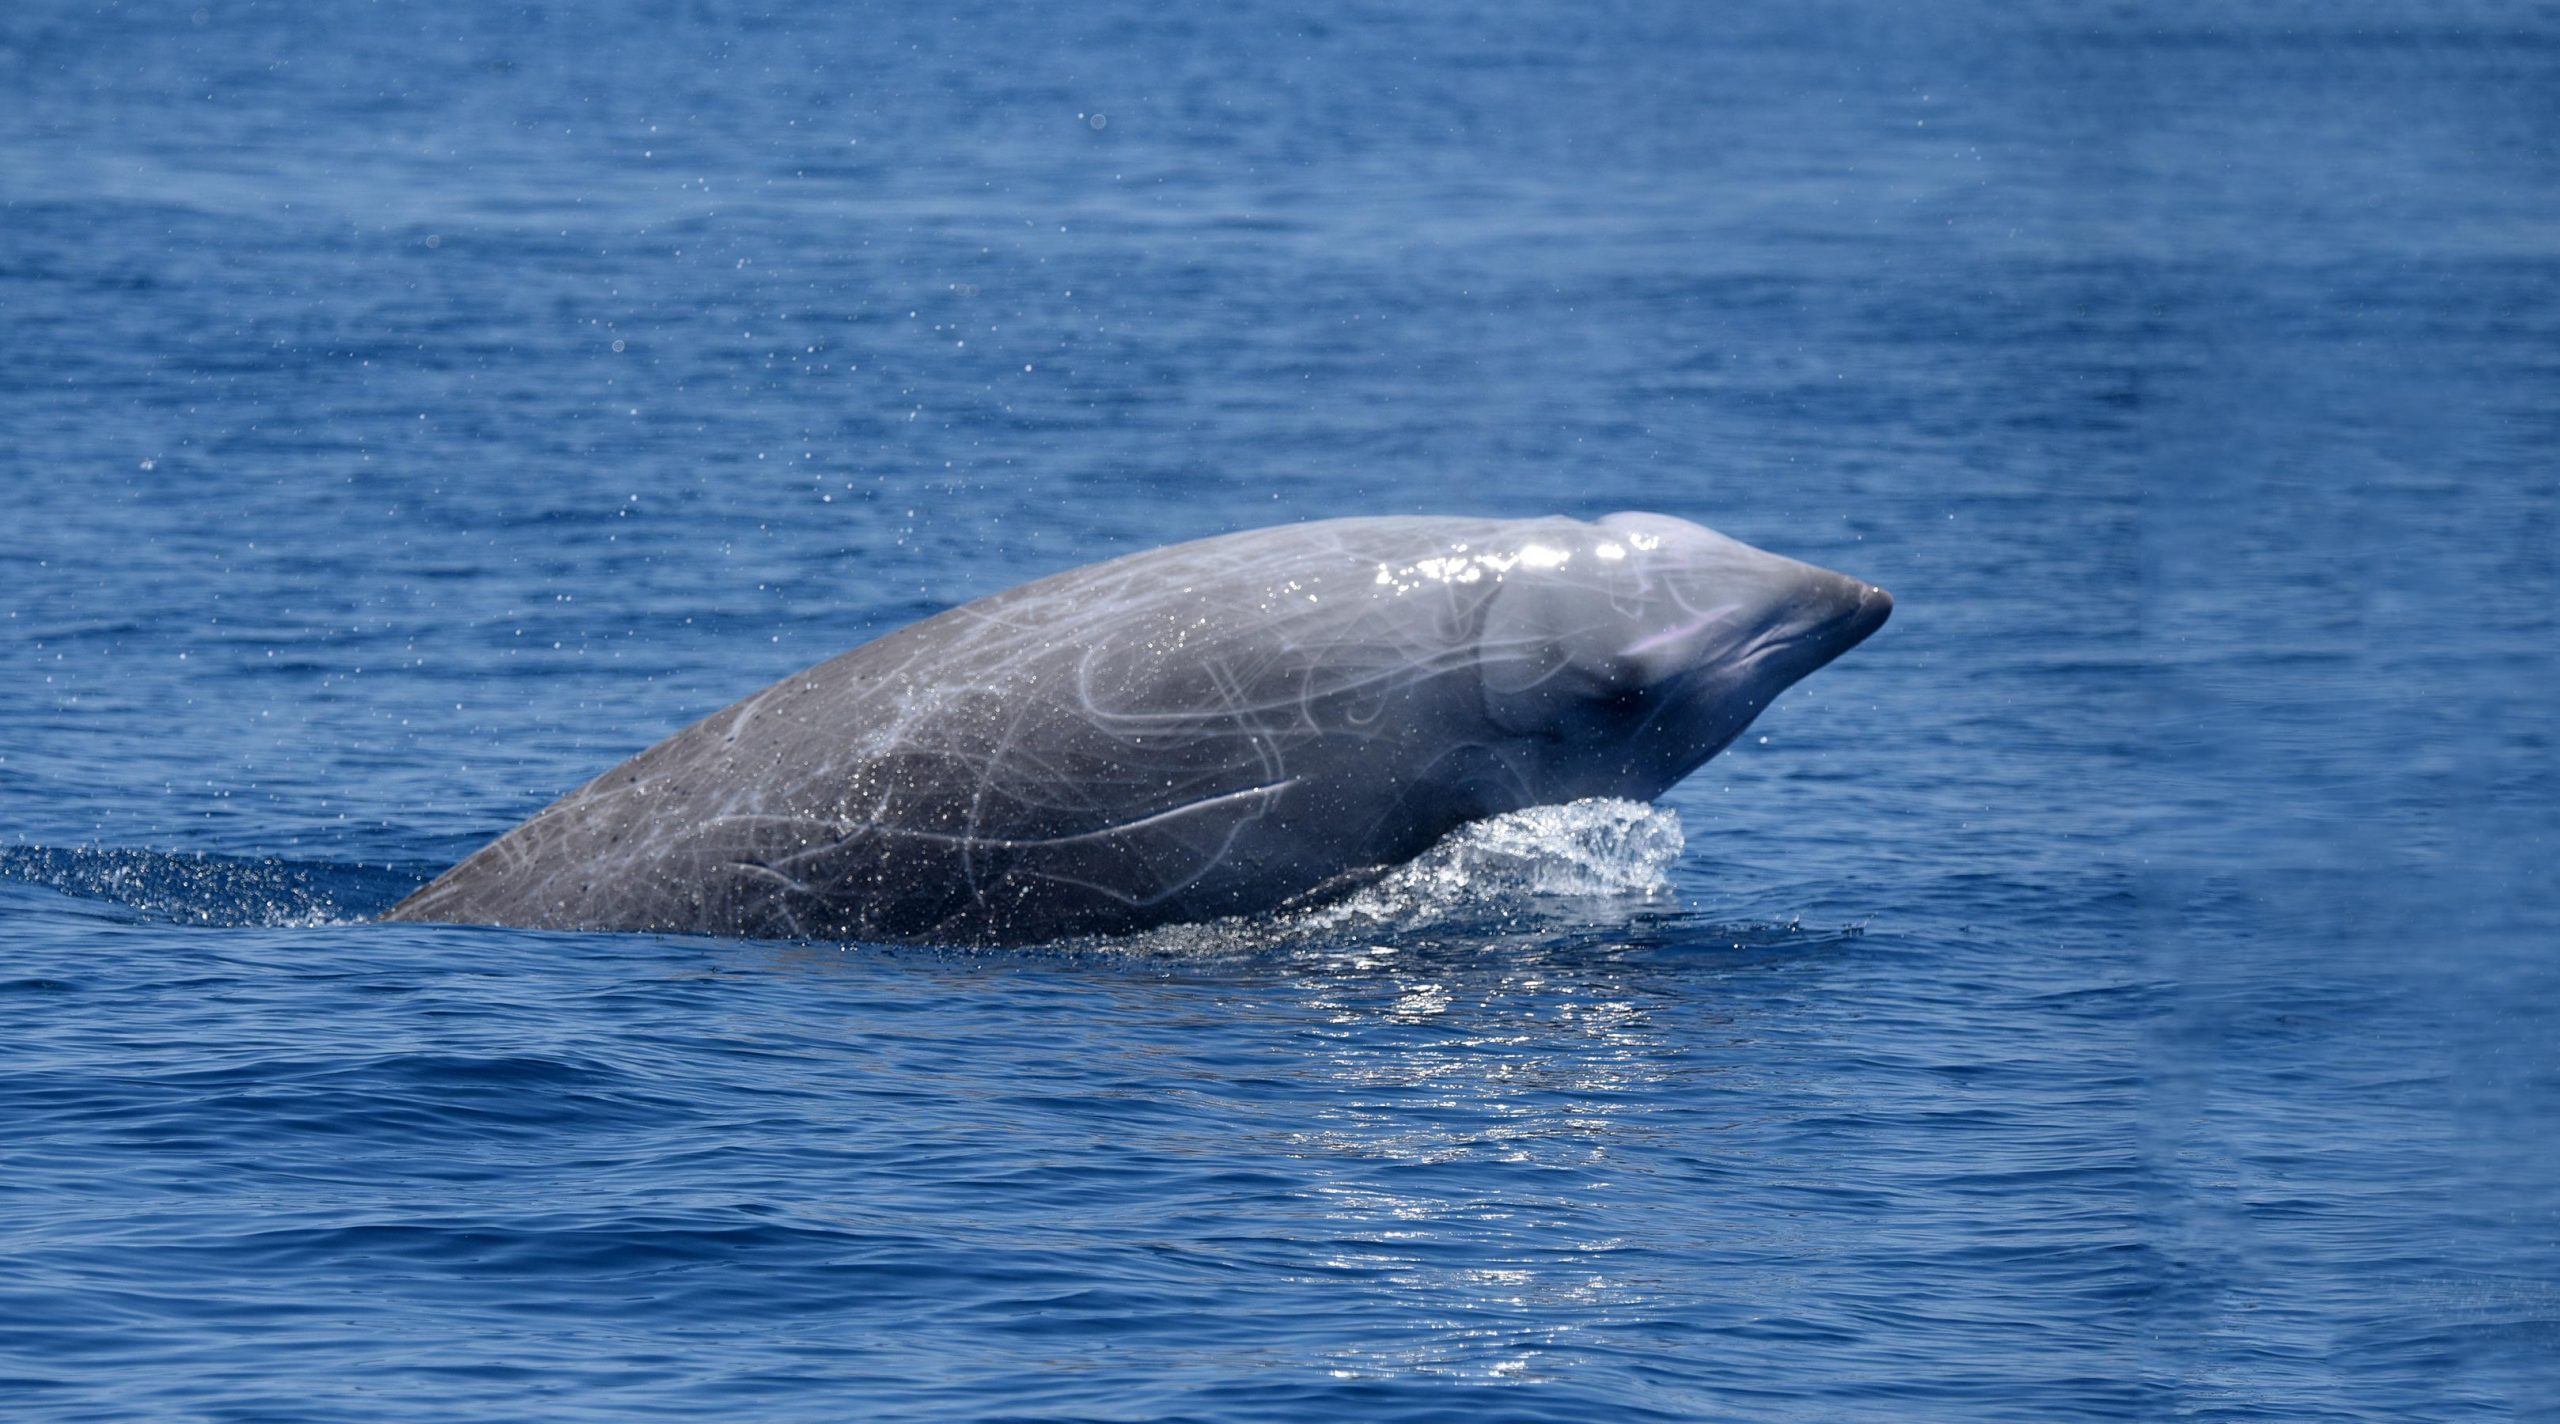 Extreme Diving in Mammals: Cuvier's Beaked Whale Breaks Record With 3 Hour  42 Minute Dive